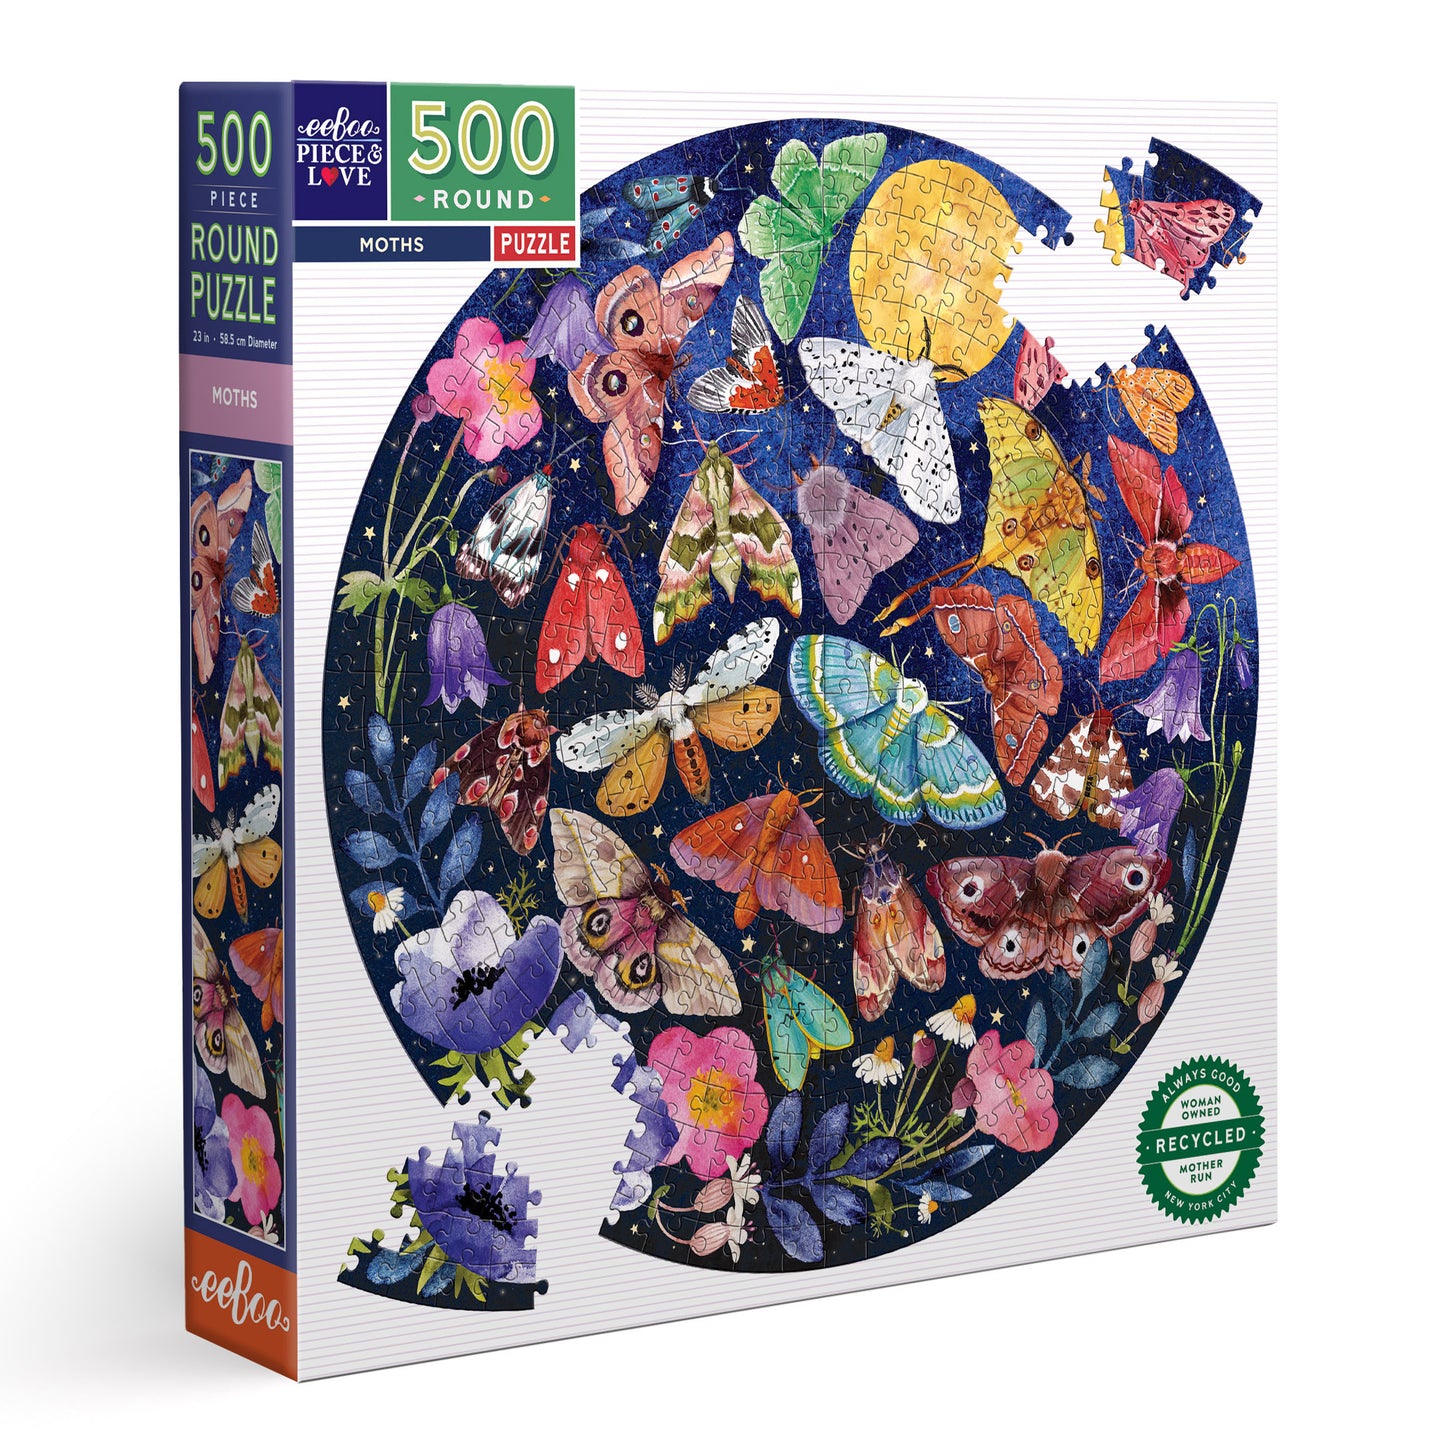 Moths 500 Piece Round Jigsaw Puzzle eeBoo Unique Goblincore Gifts for Adults